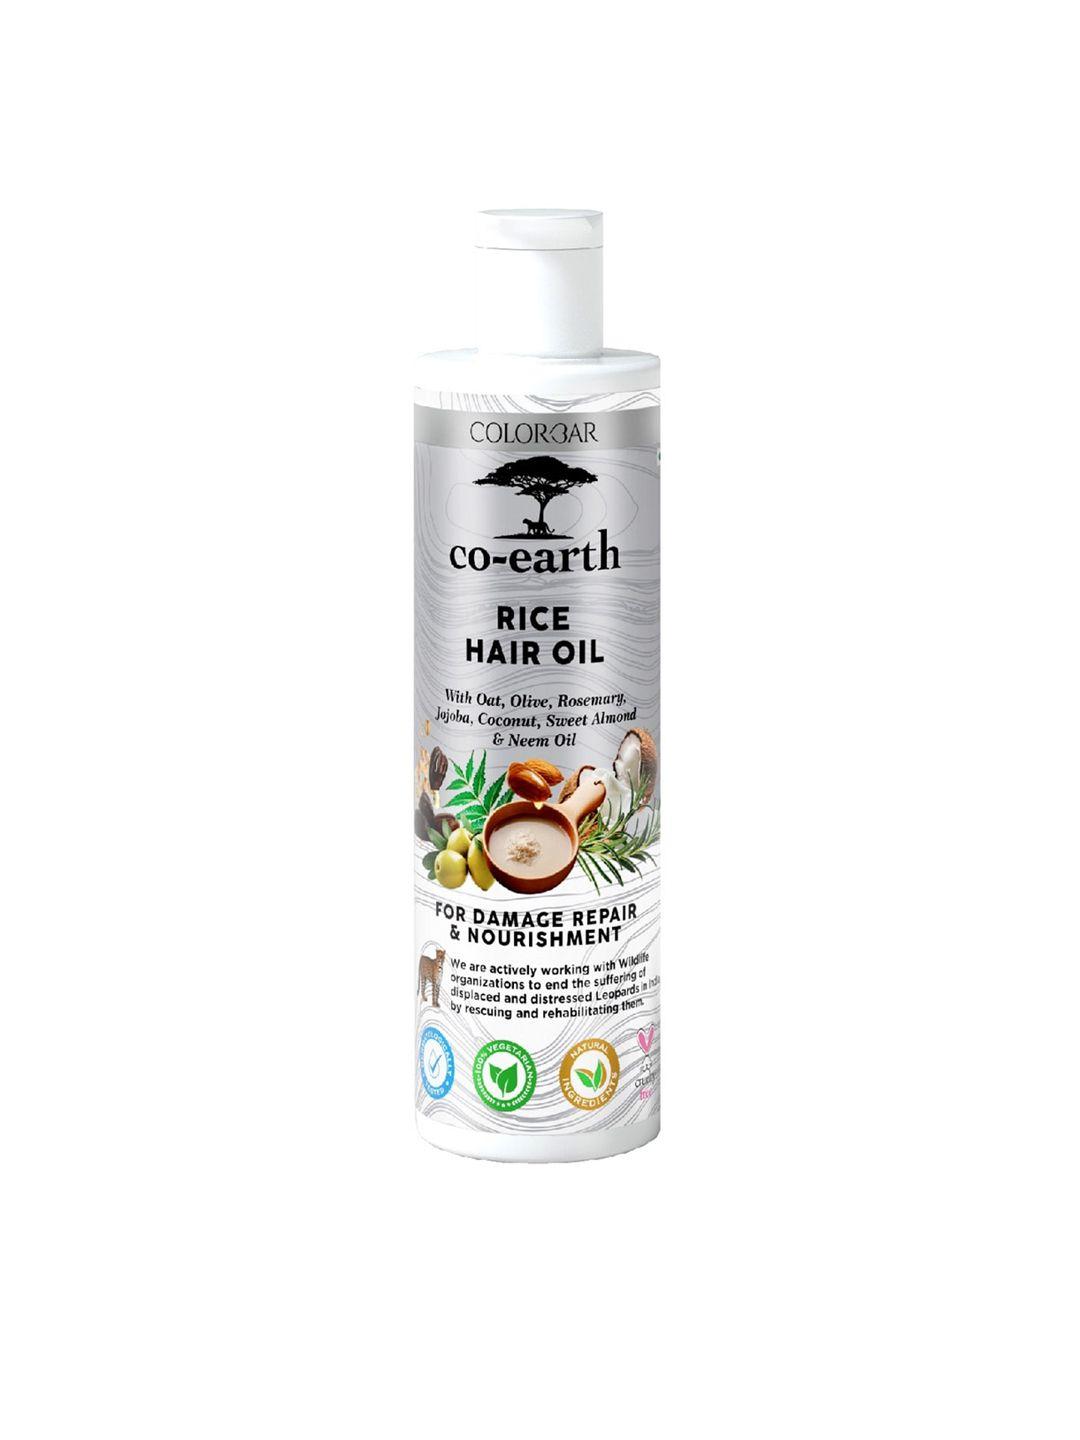 colorbar co-earth rice hair oil with oat & olive oil for damage repair & nourishment-250ml